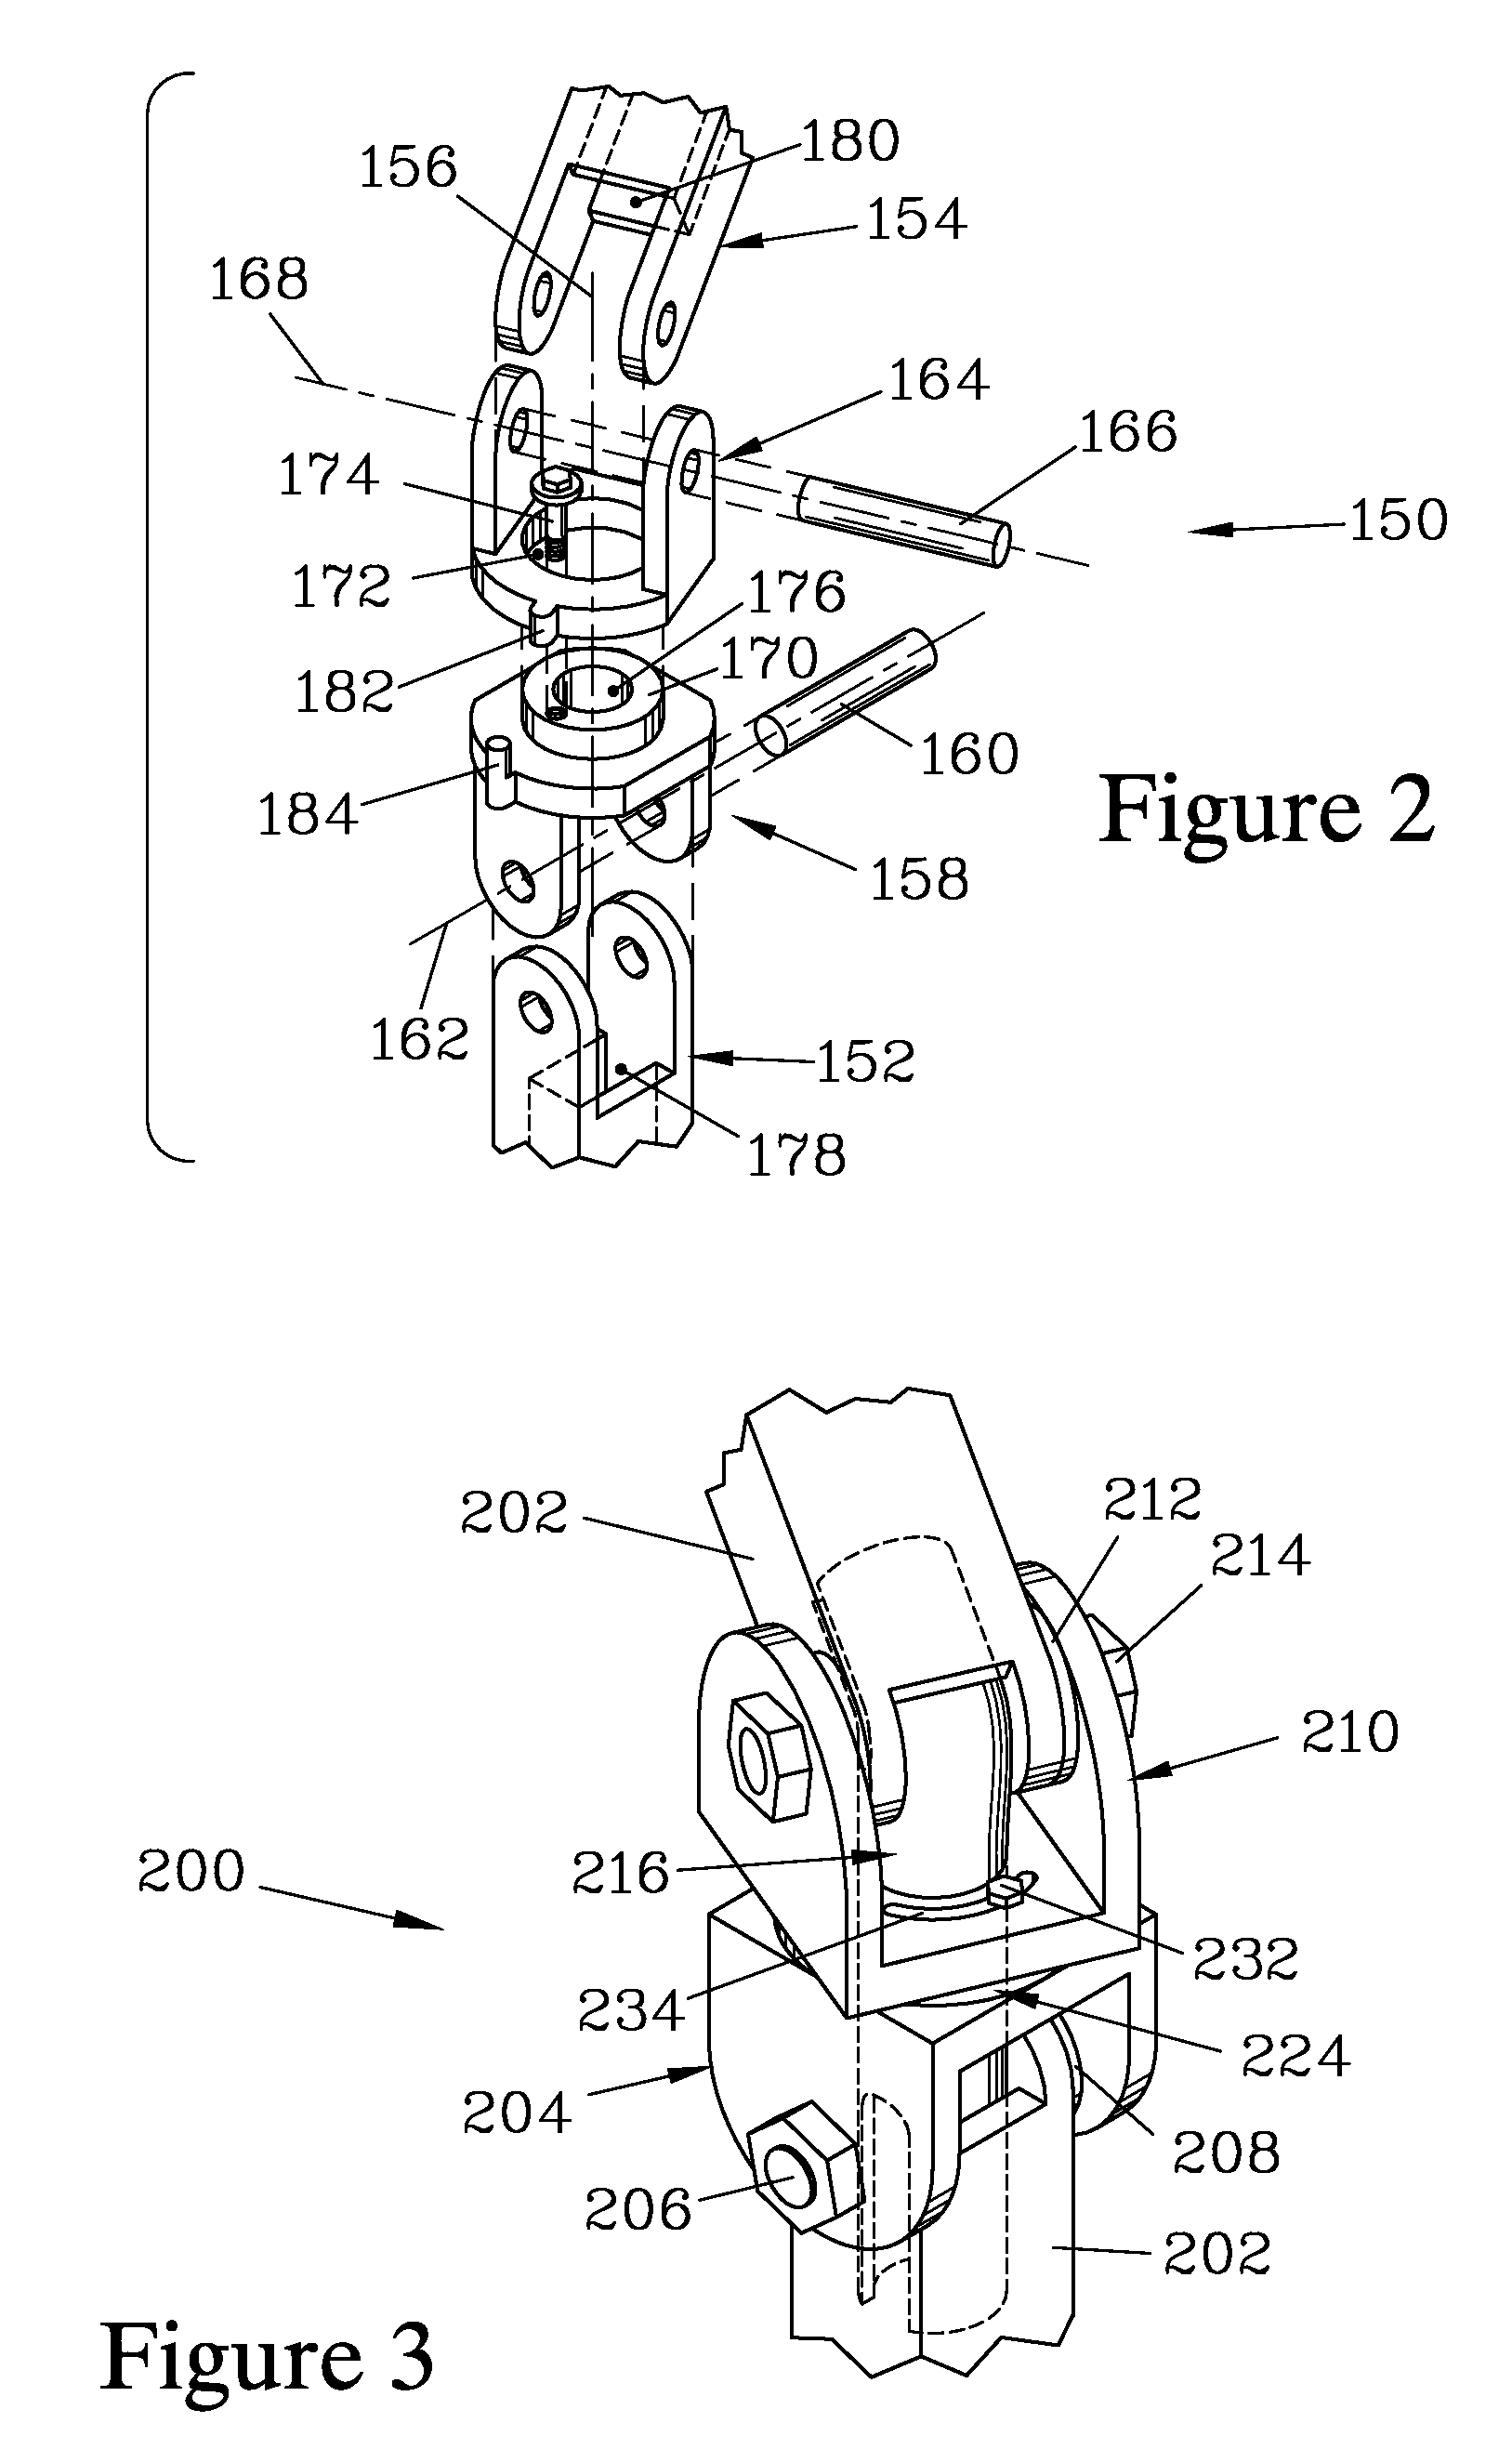 Adjustable support arm for audio visual device